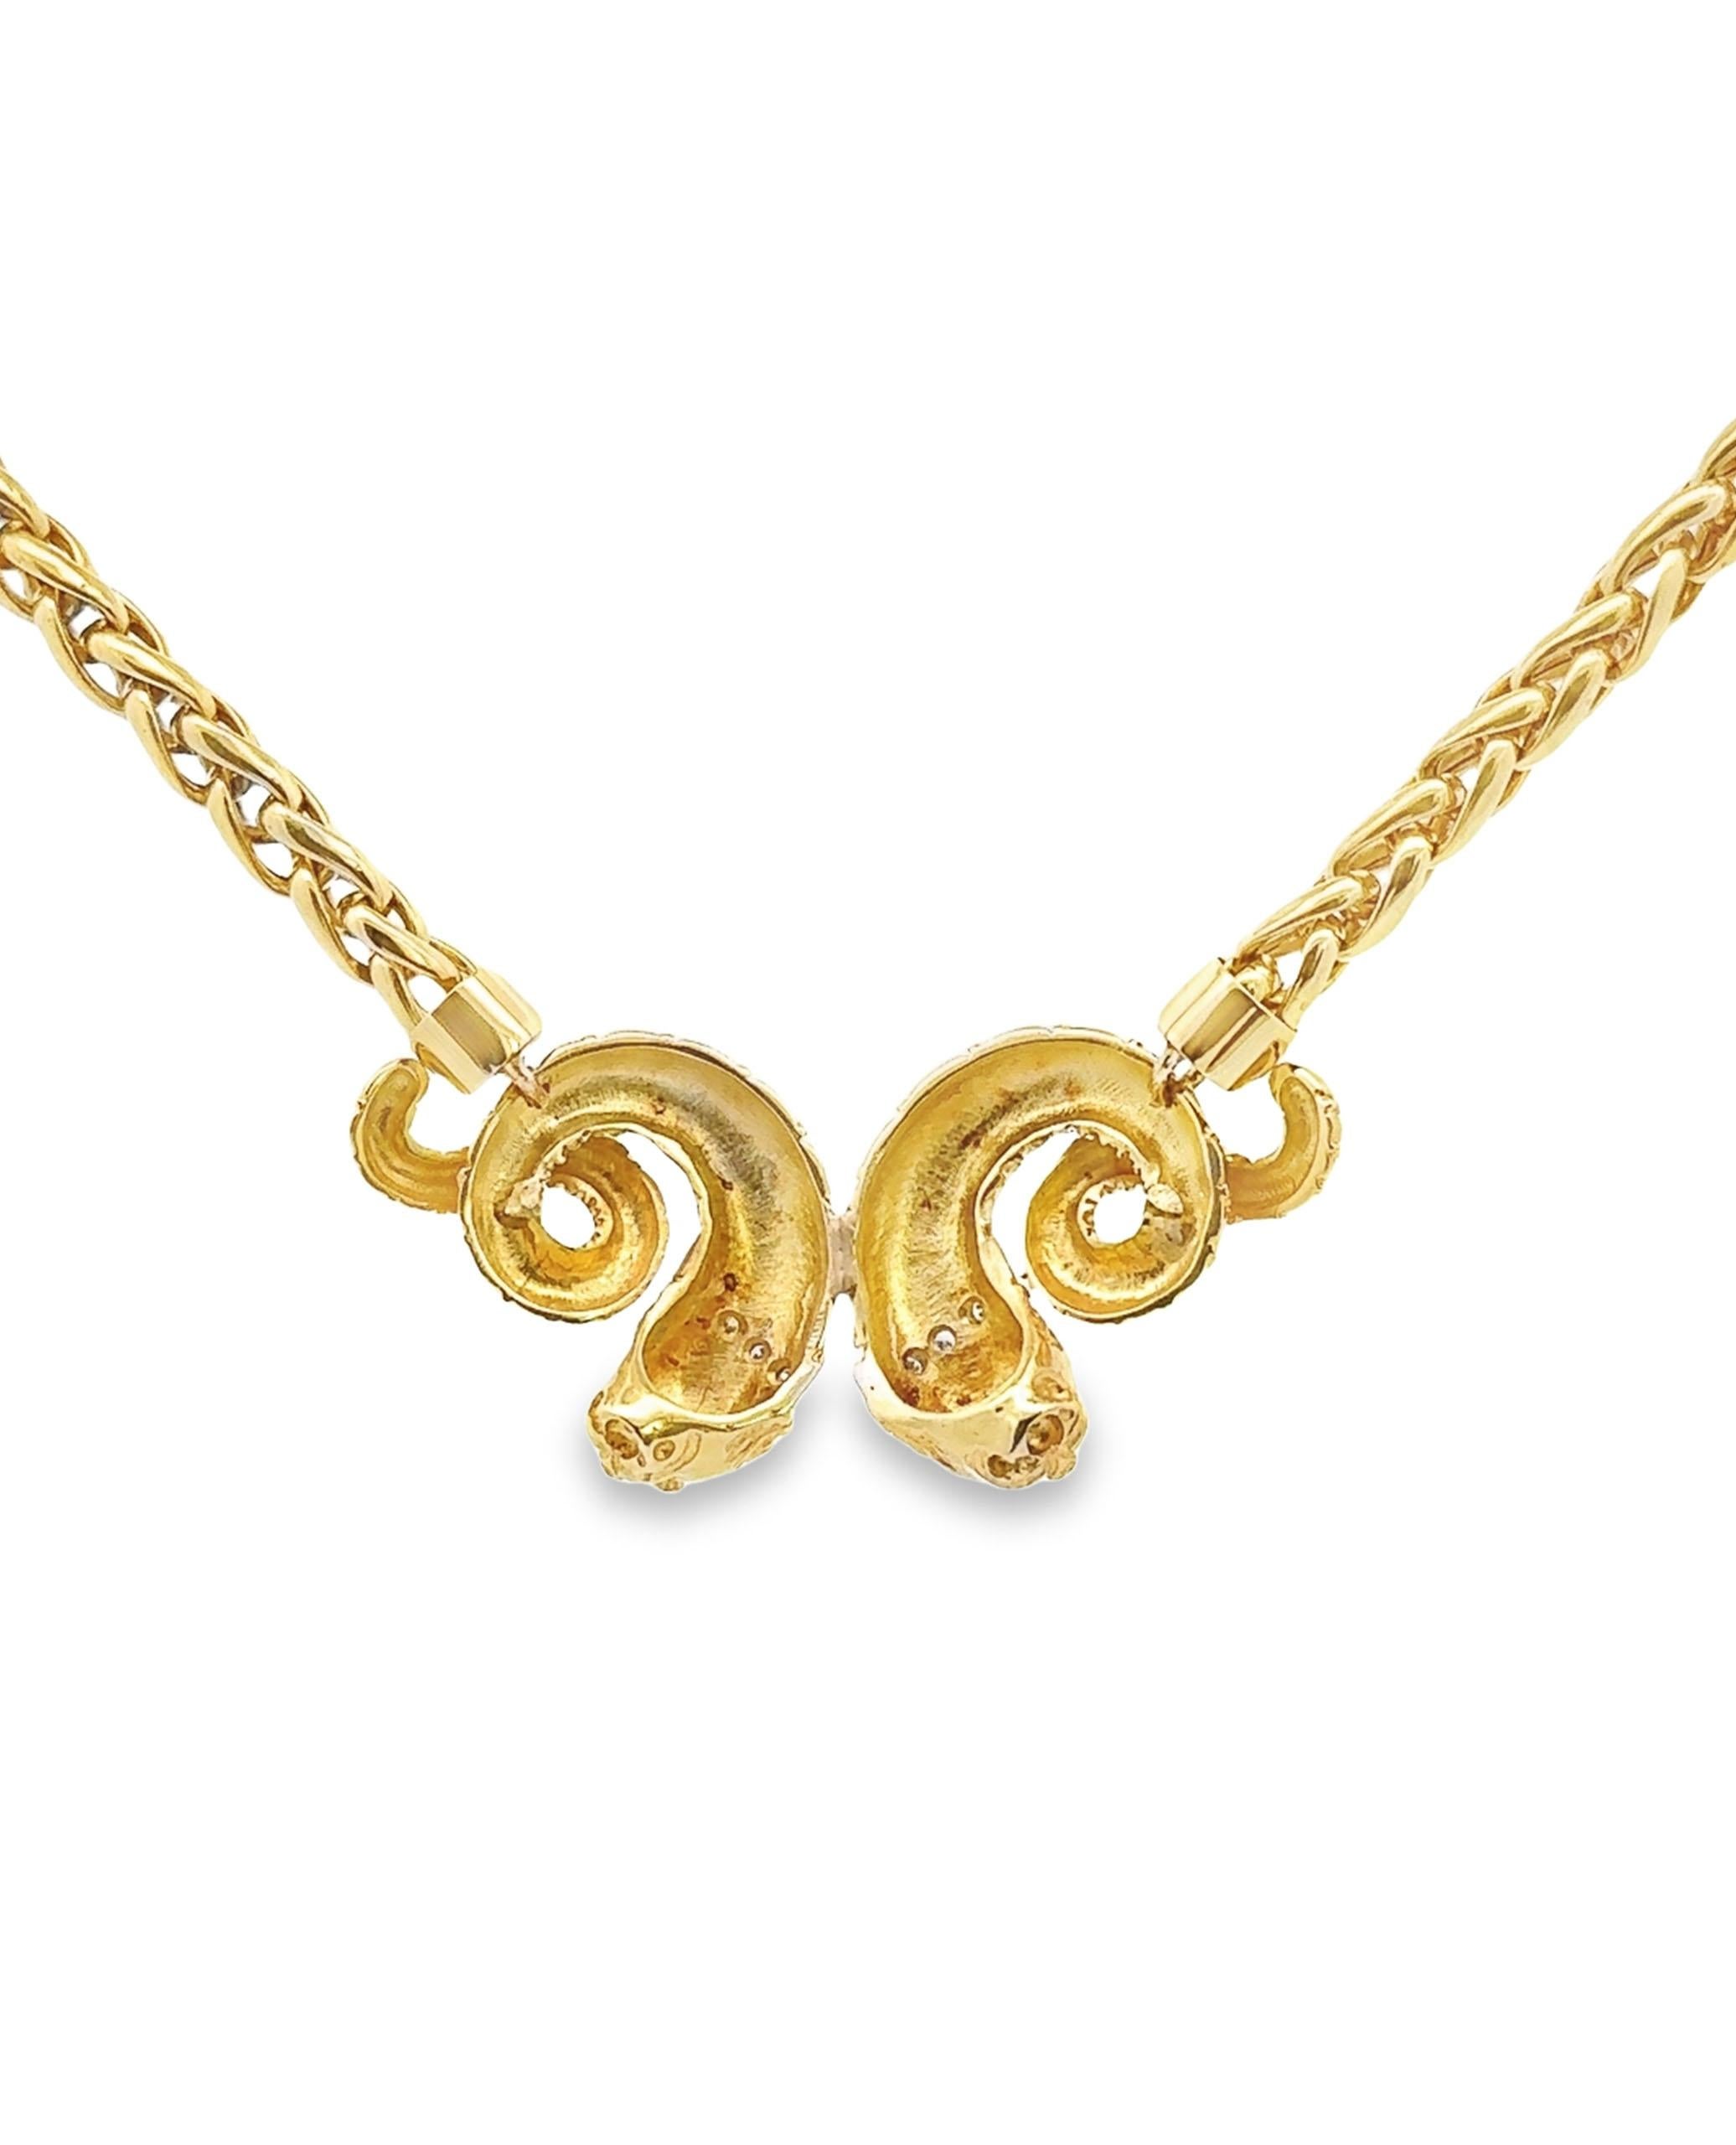 Round Cut 18K Yellow Gold Greek Inspired Lion Necklace For Sale